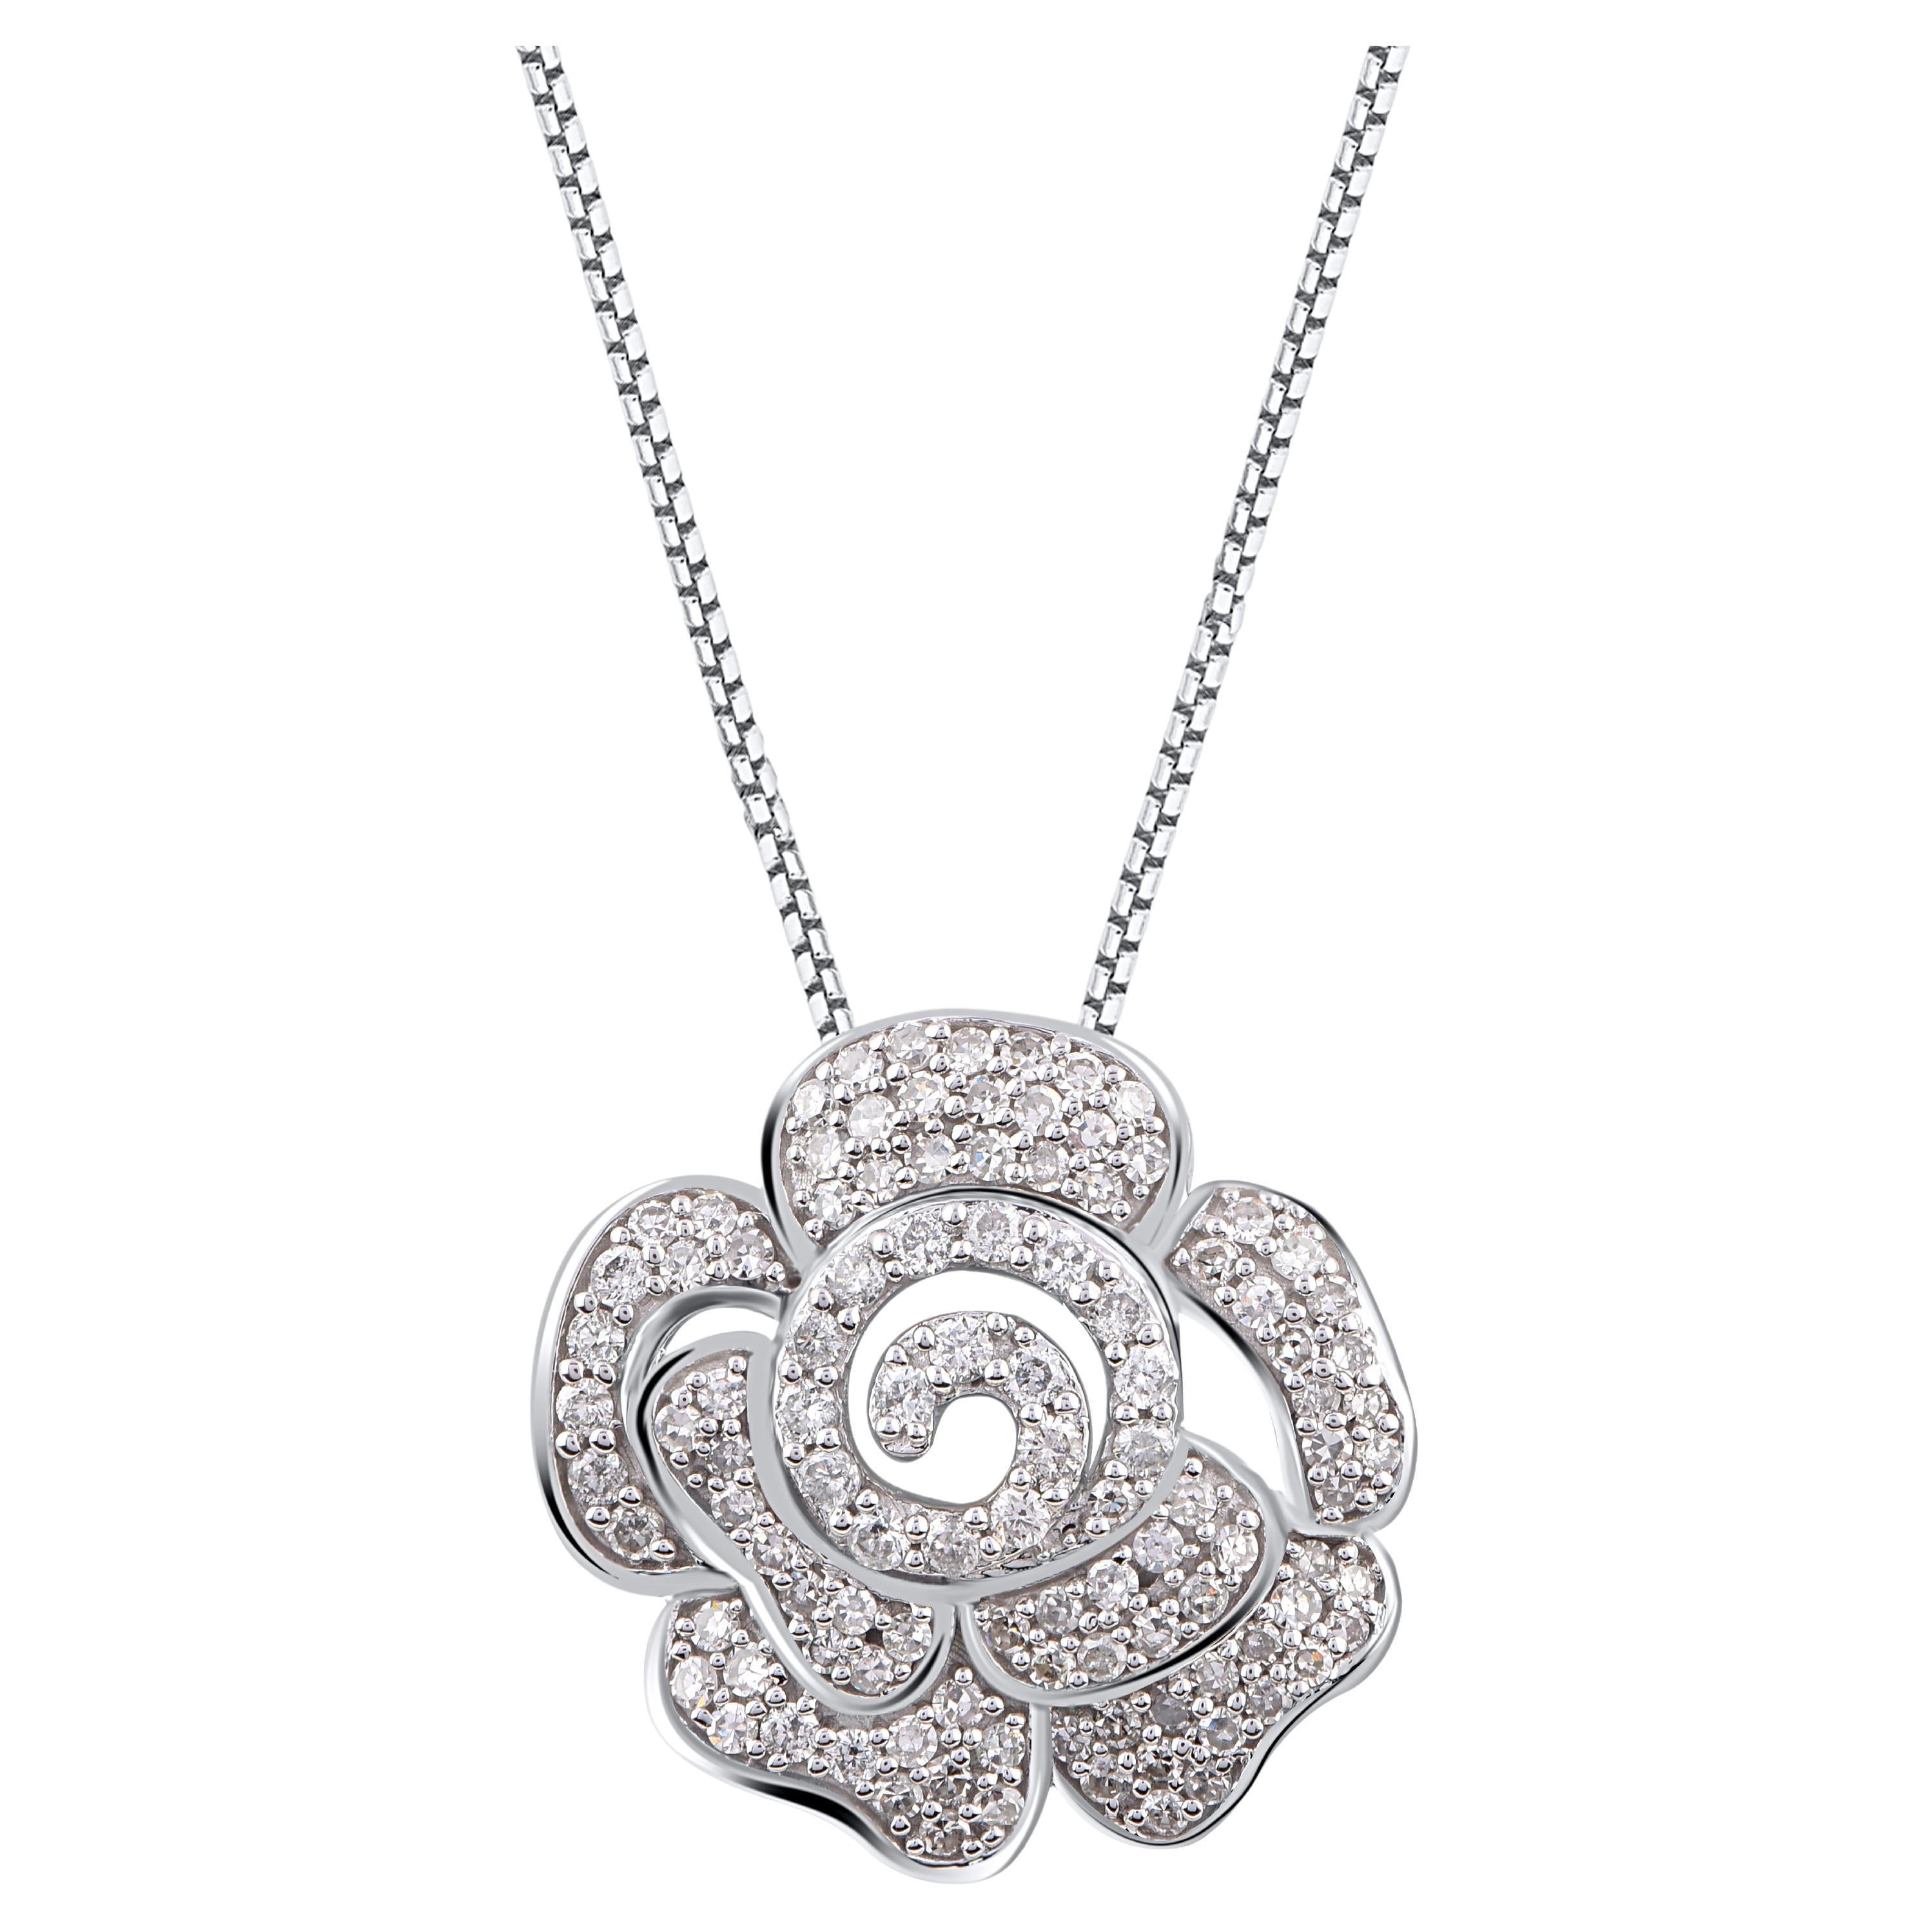 TJD 0.50 Carat Natural Round Diamond 14KT White Gold Rose Pendant Necklace For Sale